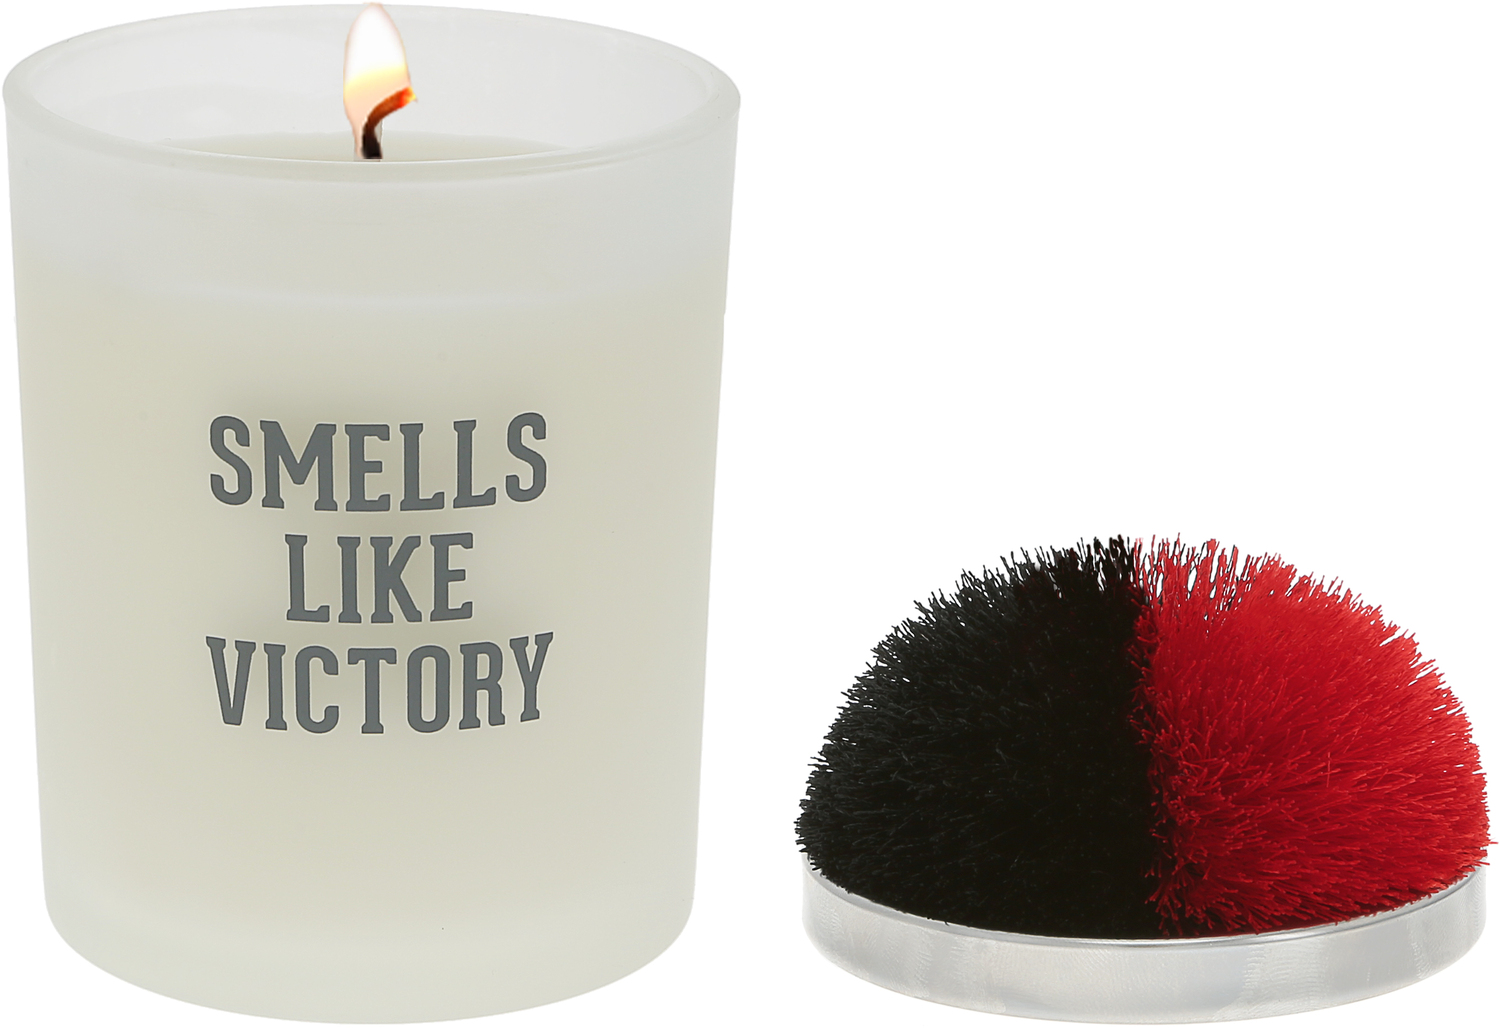 Victory - Red & Black by Repre-Scent - Victory - Red & Black - 5.5 oz - 100% Soy Wax Candle with Pom Pom Lid
Scent: Tranquility